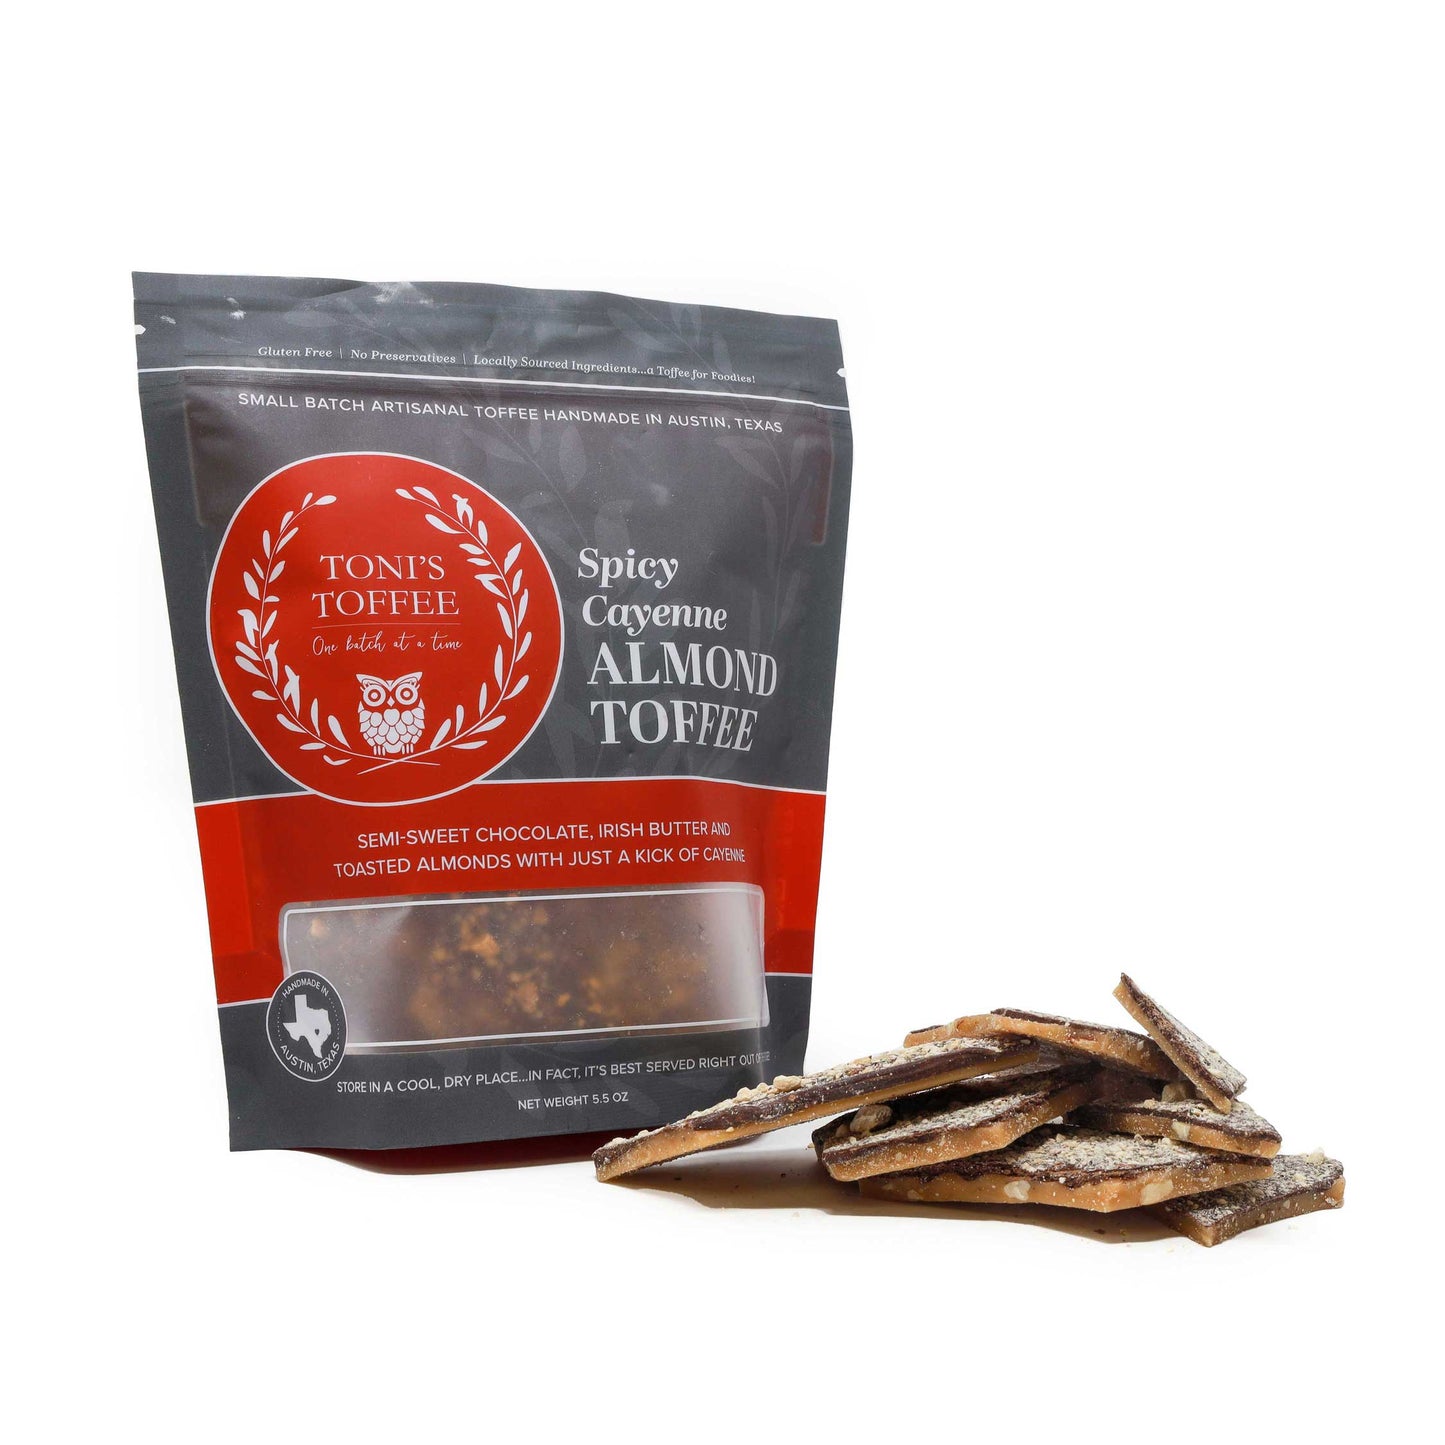 Spicy Almond Cayenne Toffee